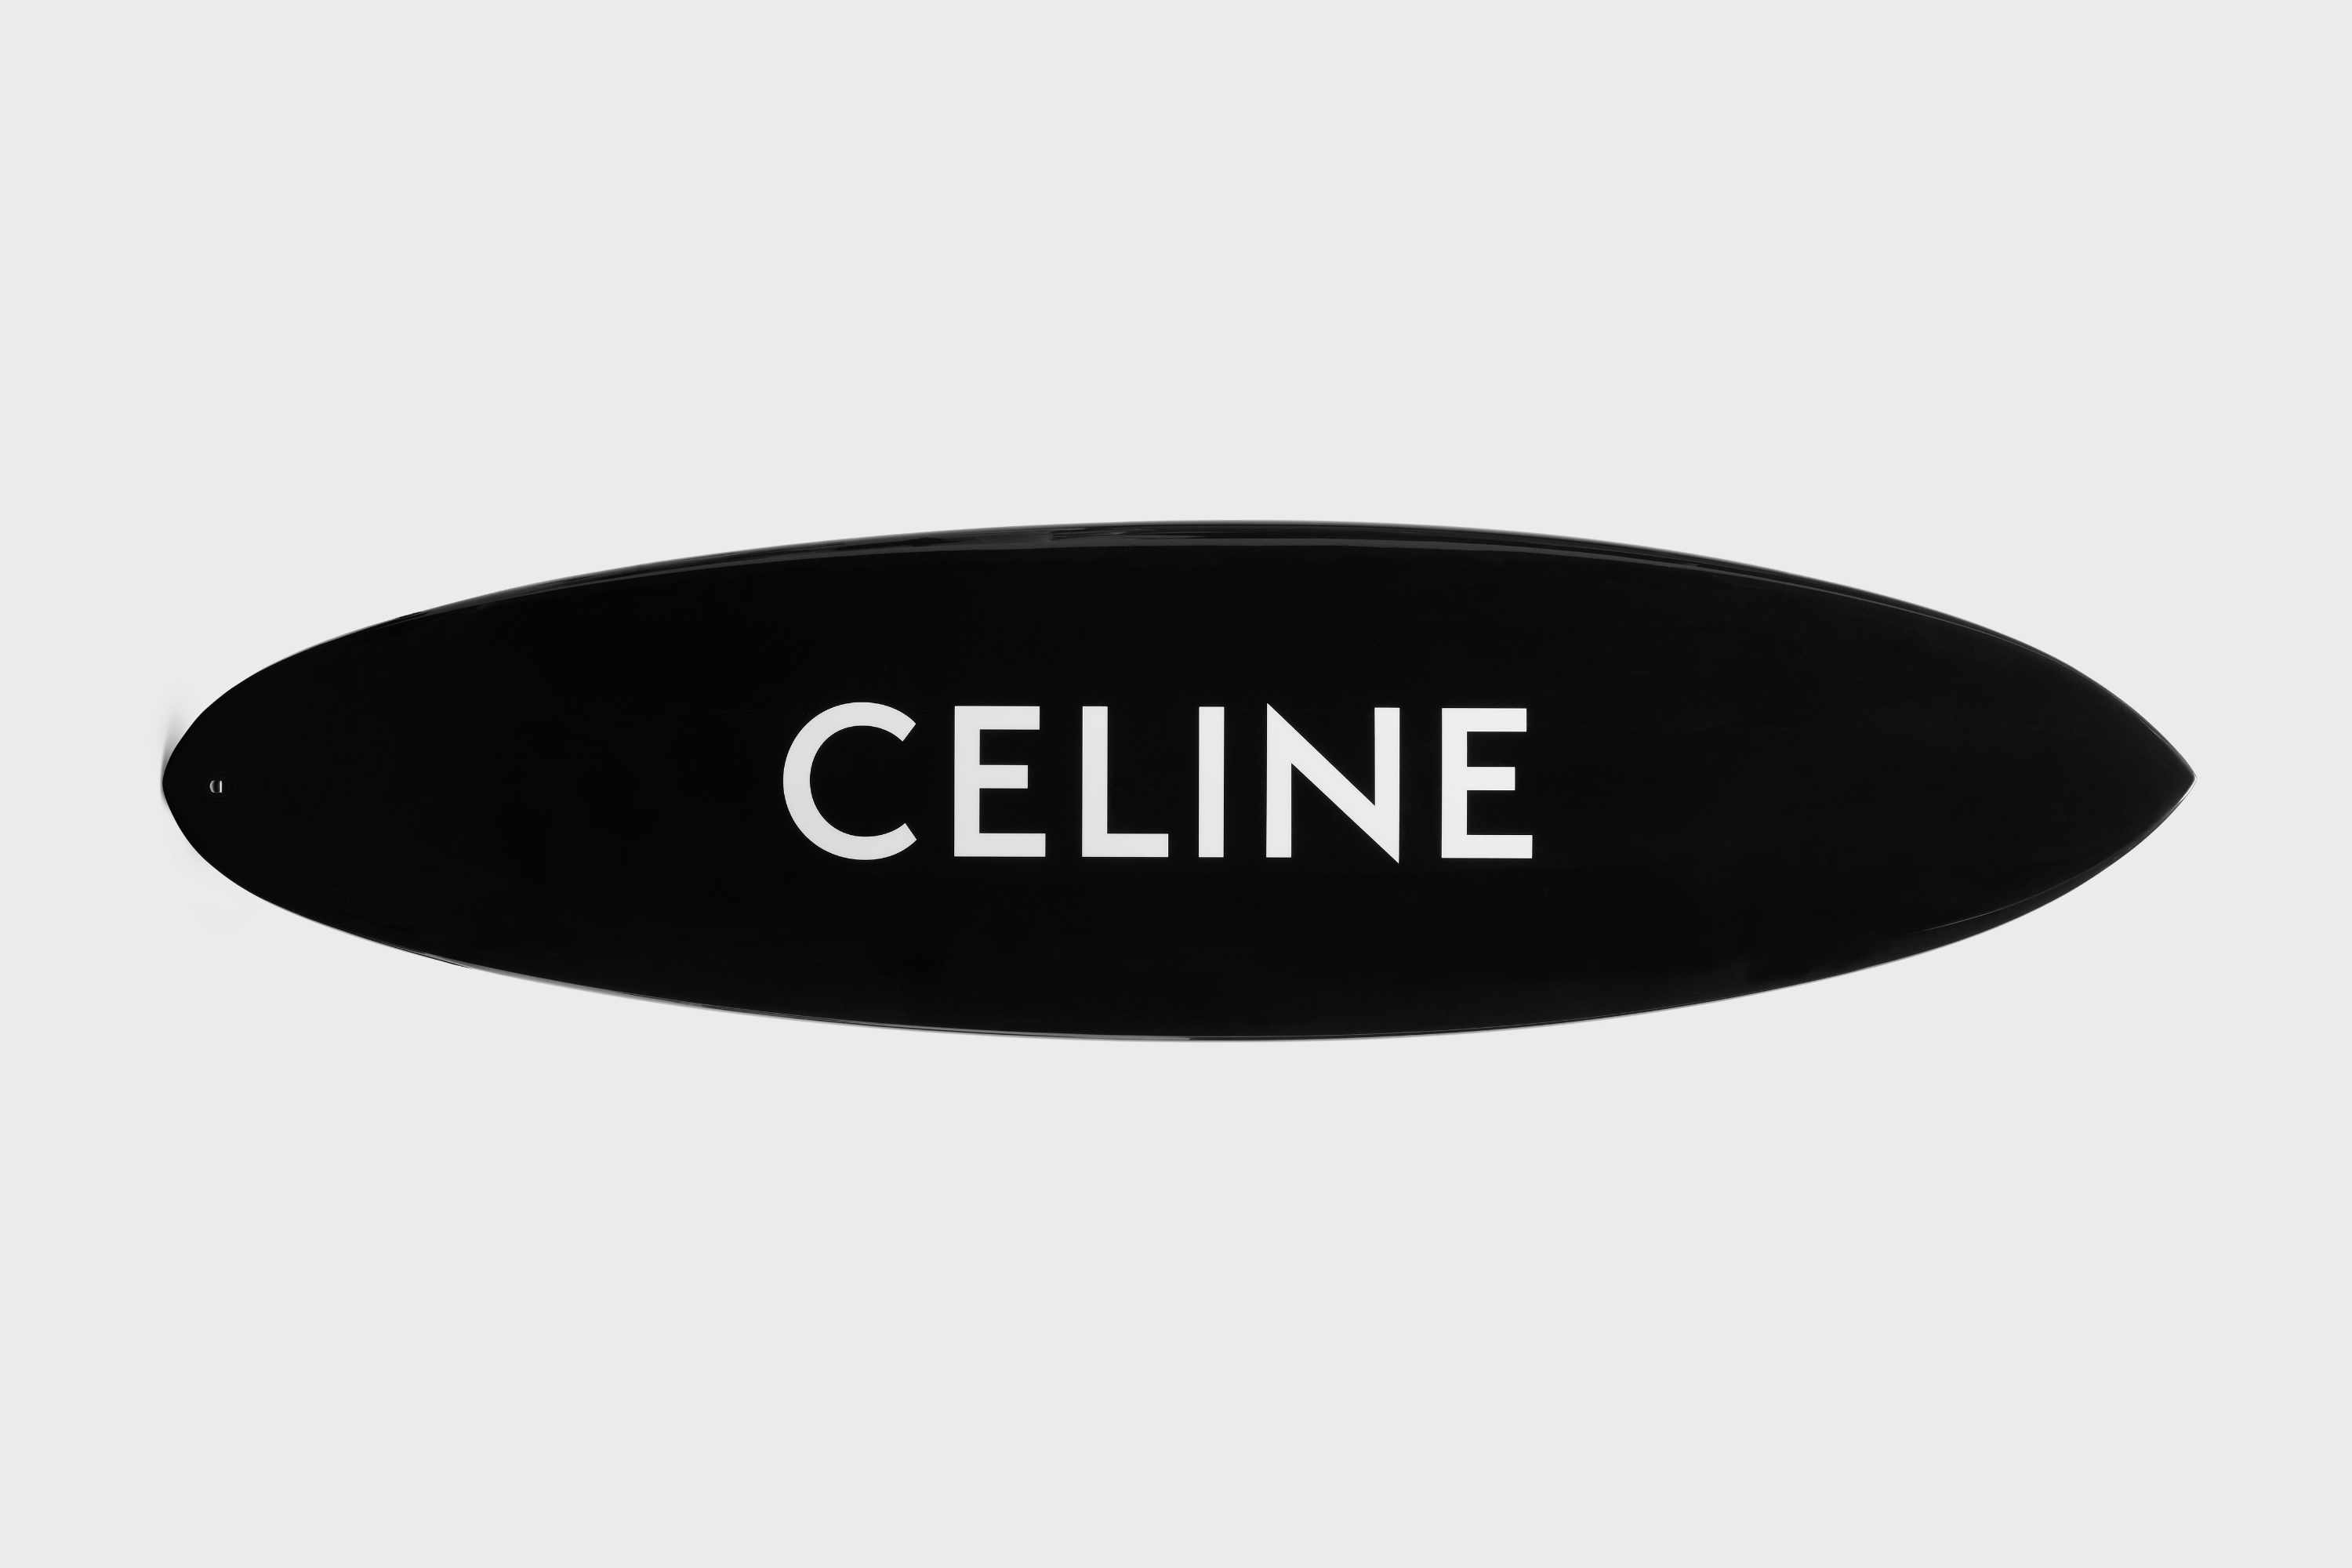 CELINE's Surf menswear capsule, including shirts, glasses, shoes, sneakers, bags, and surfboard